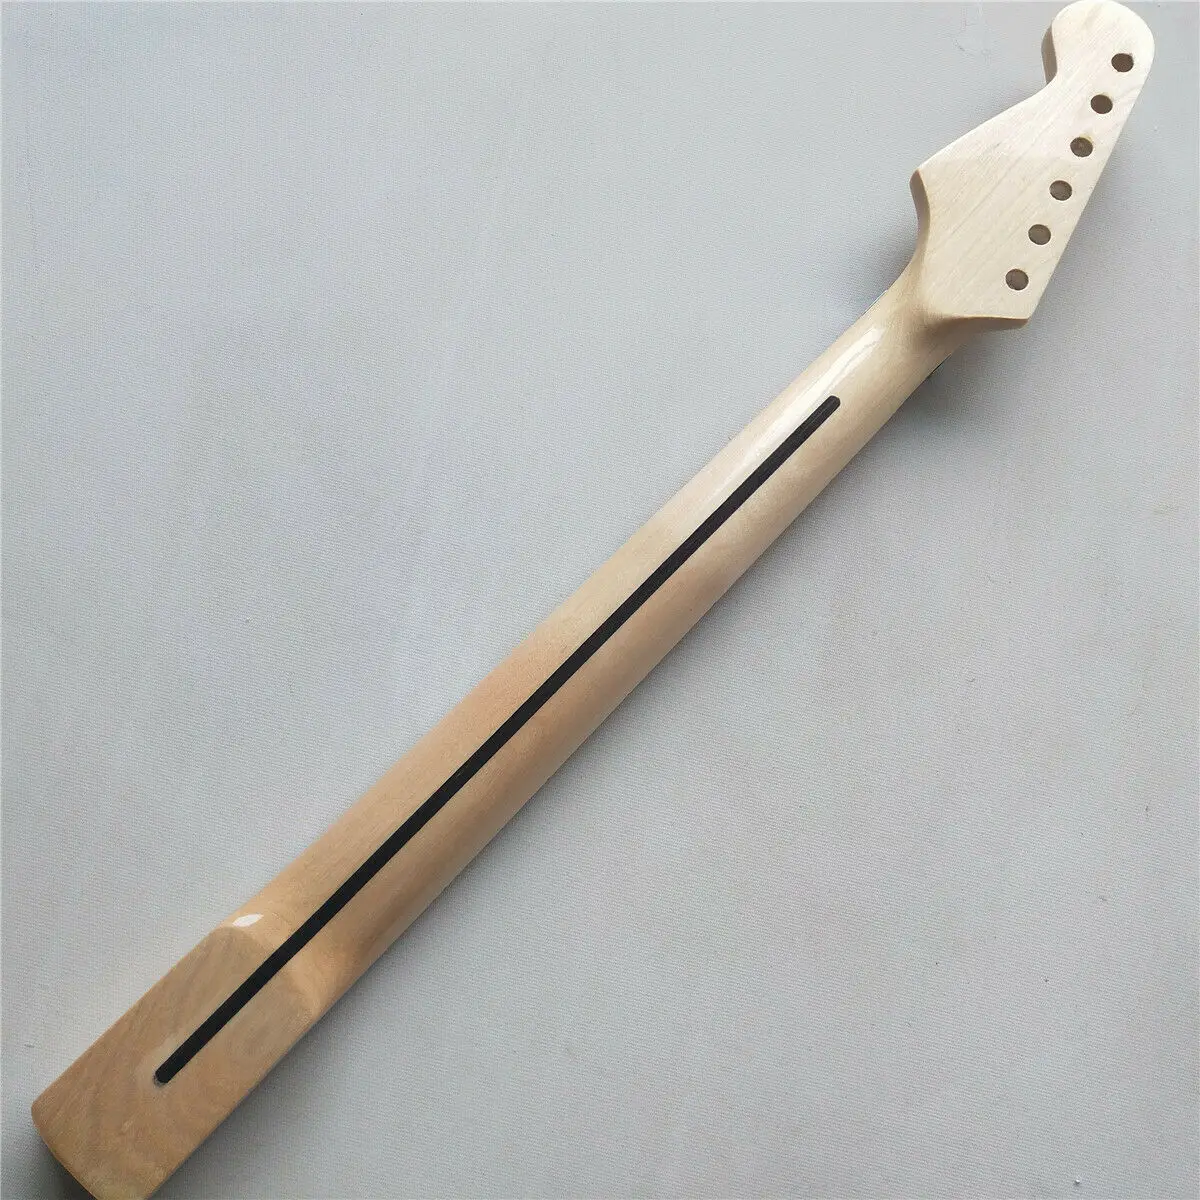 25.5inch Full scalloped Guitar Neck 22 Fret Maple Fretboard Dot Inlay Gloss for DIY New Replacement enlarge